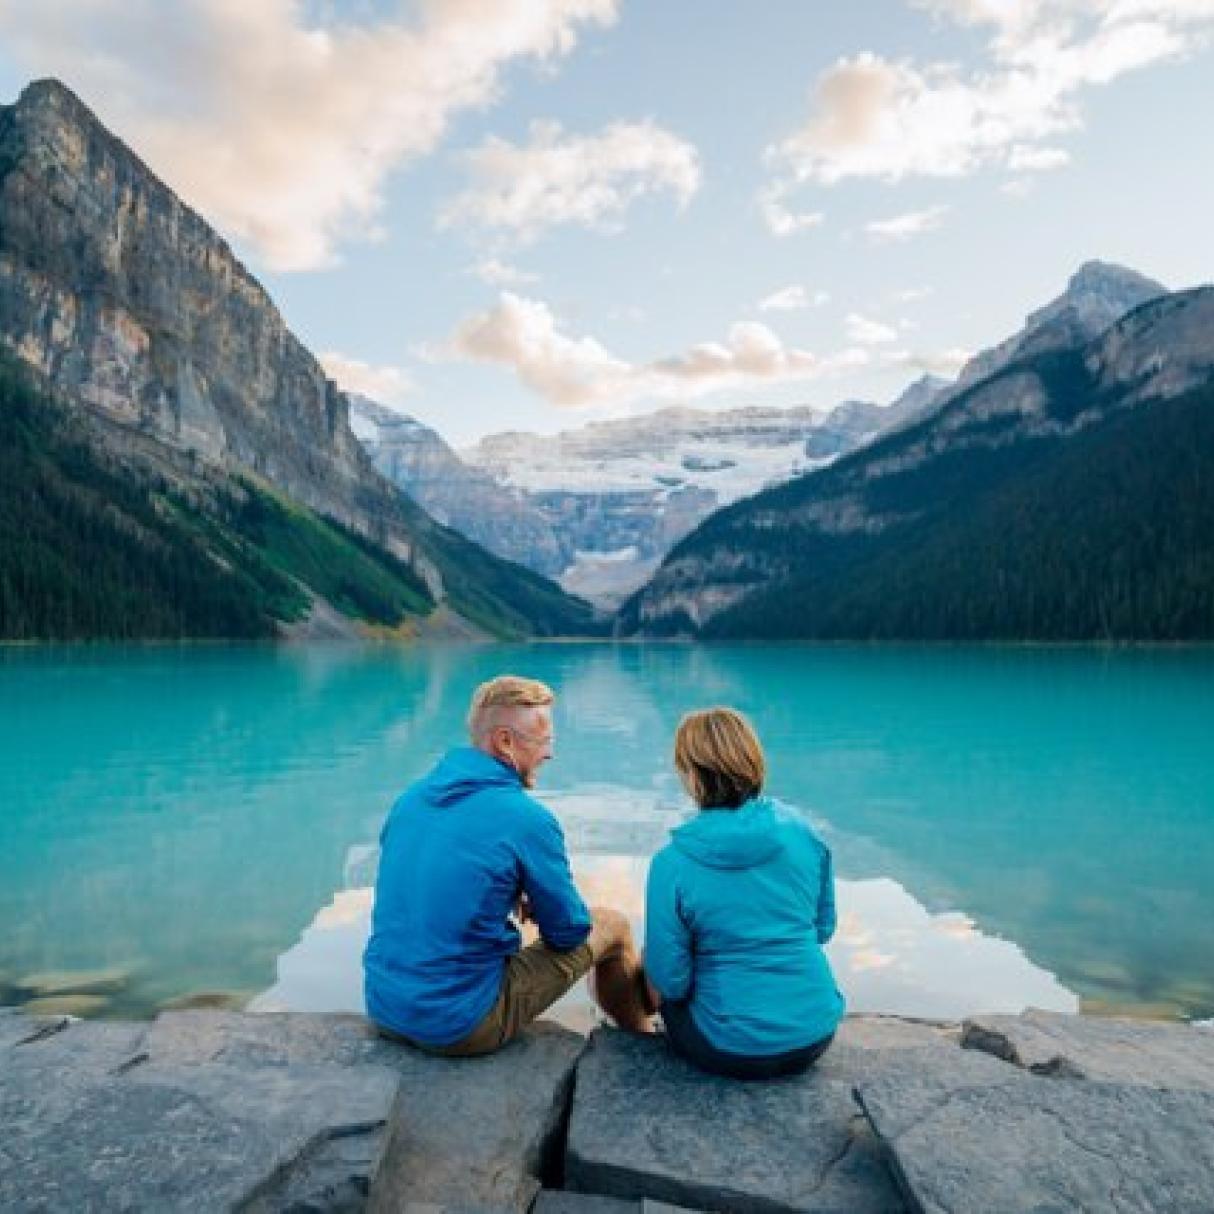 A couple sits by a lake in the mountains